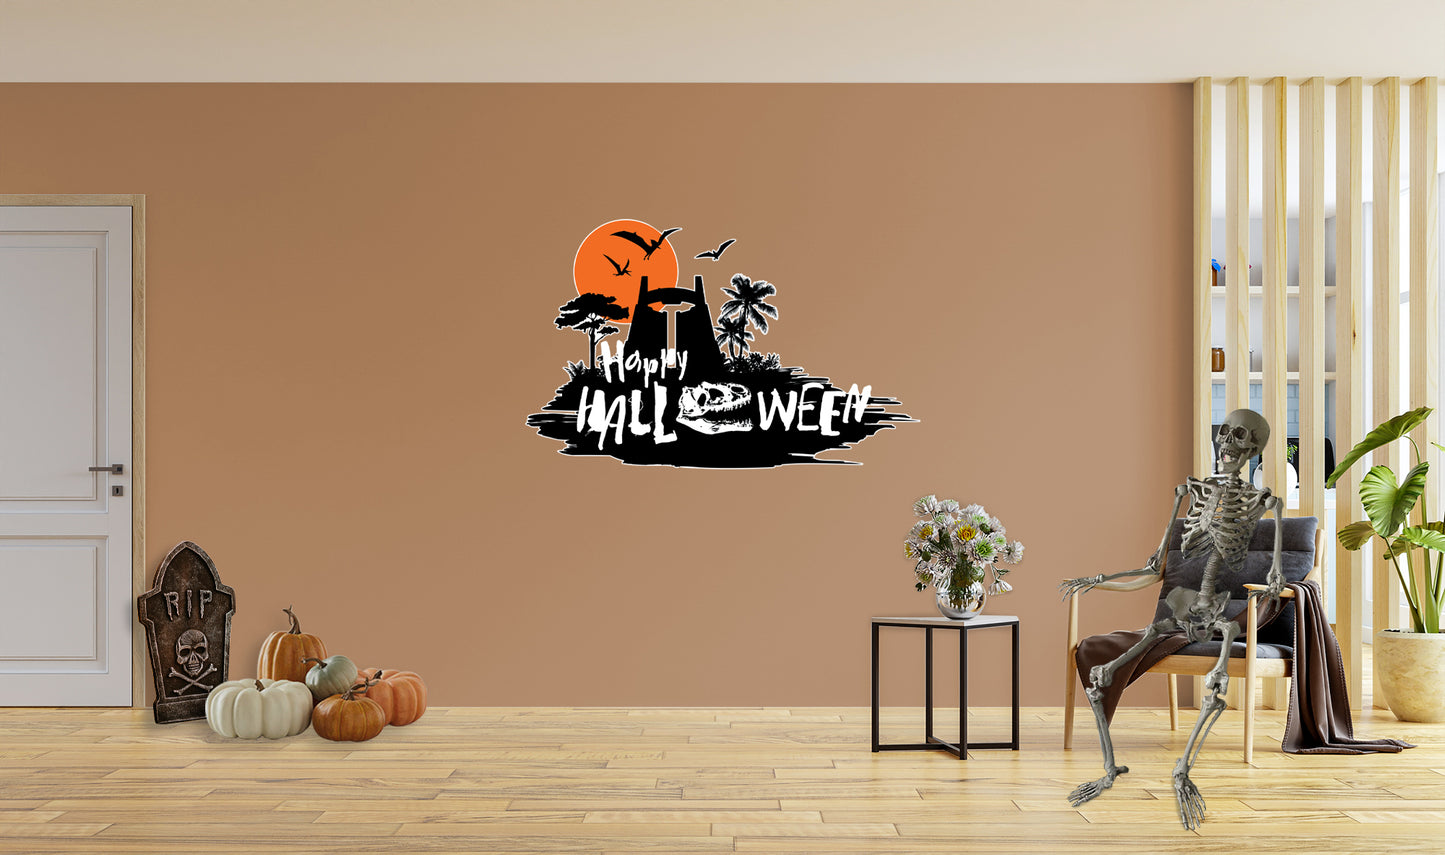 Jurassic World:  Happy Halloween Premask        - Officially Licensed NBC Universal Removable Wall   Adhesive Decal